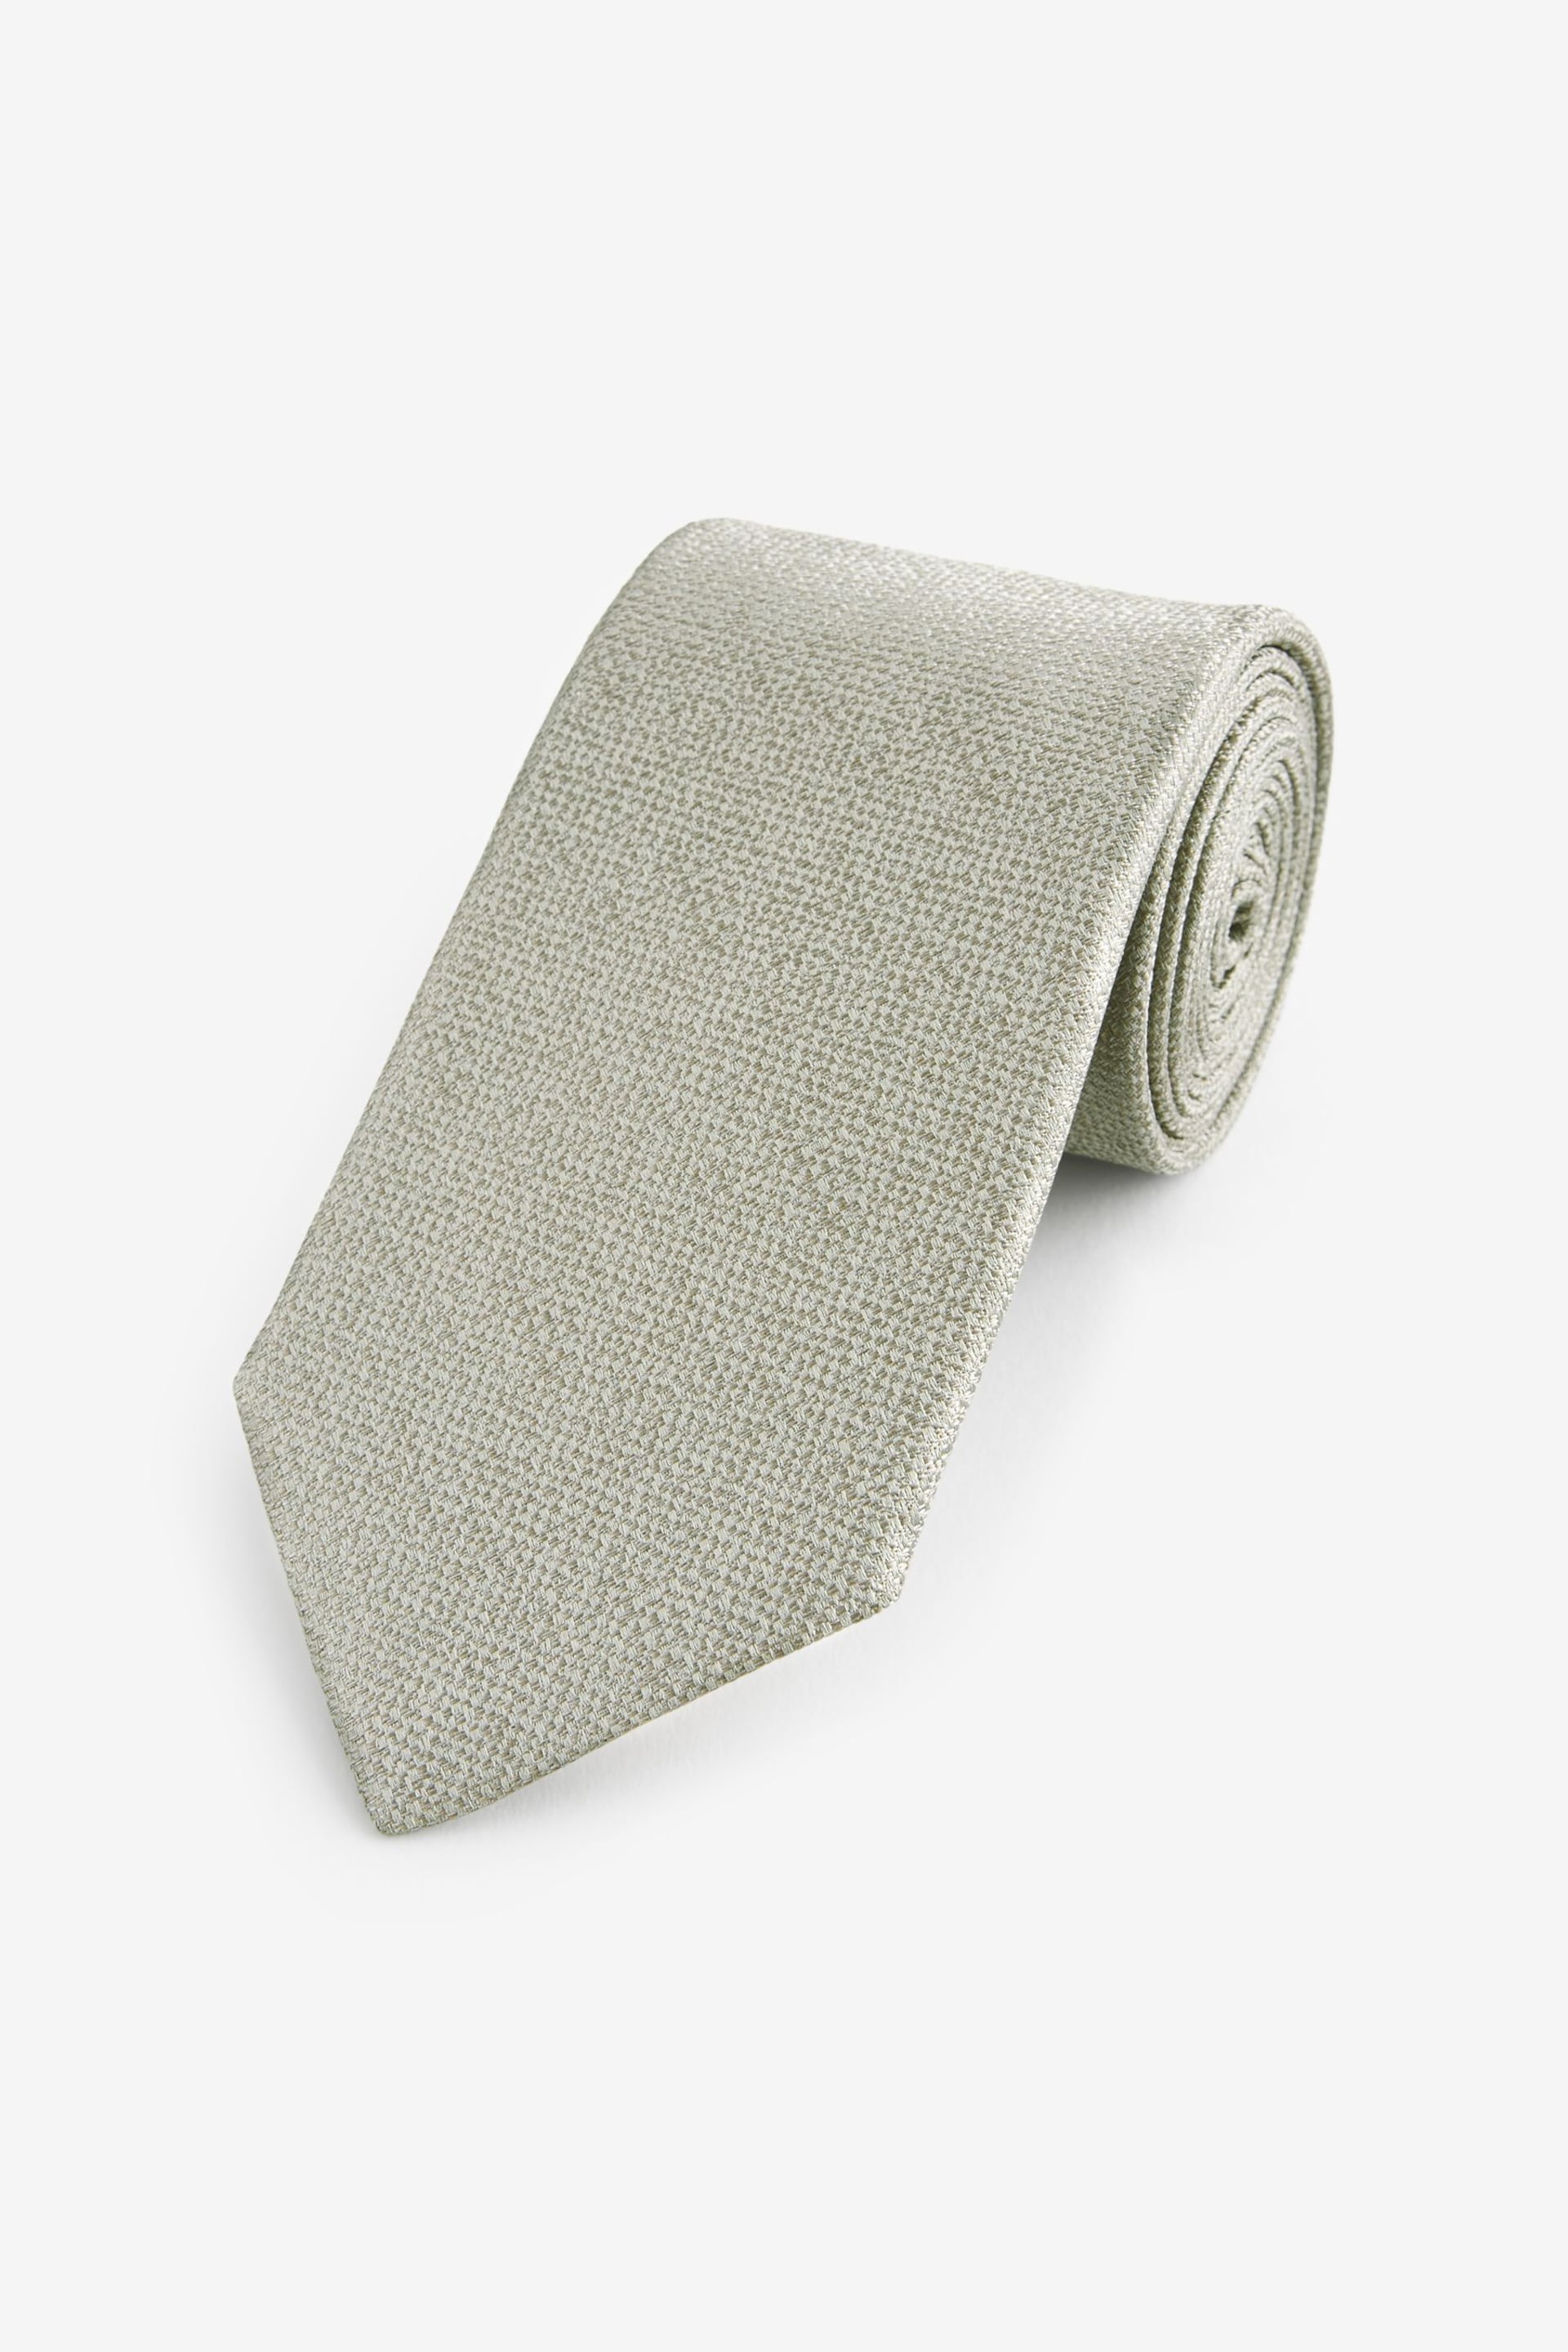 Champagne Gold Signature Made In Italy Tie - Image 1 of 3